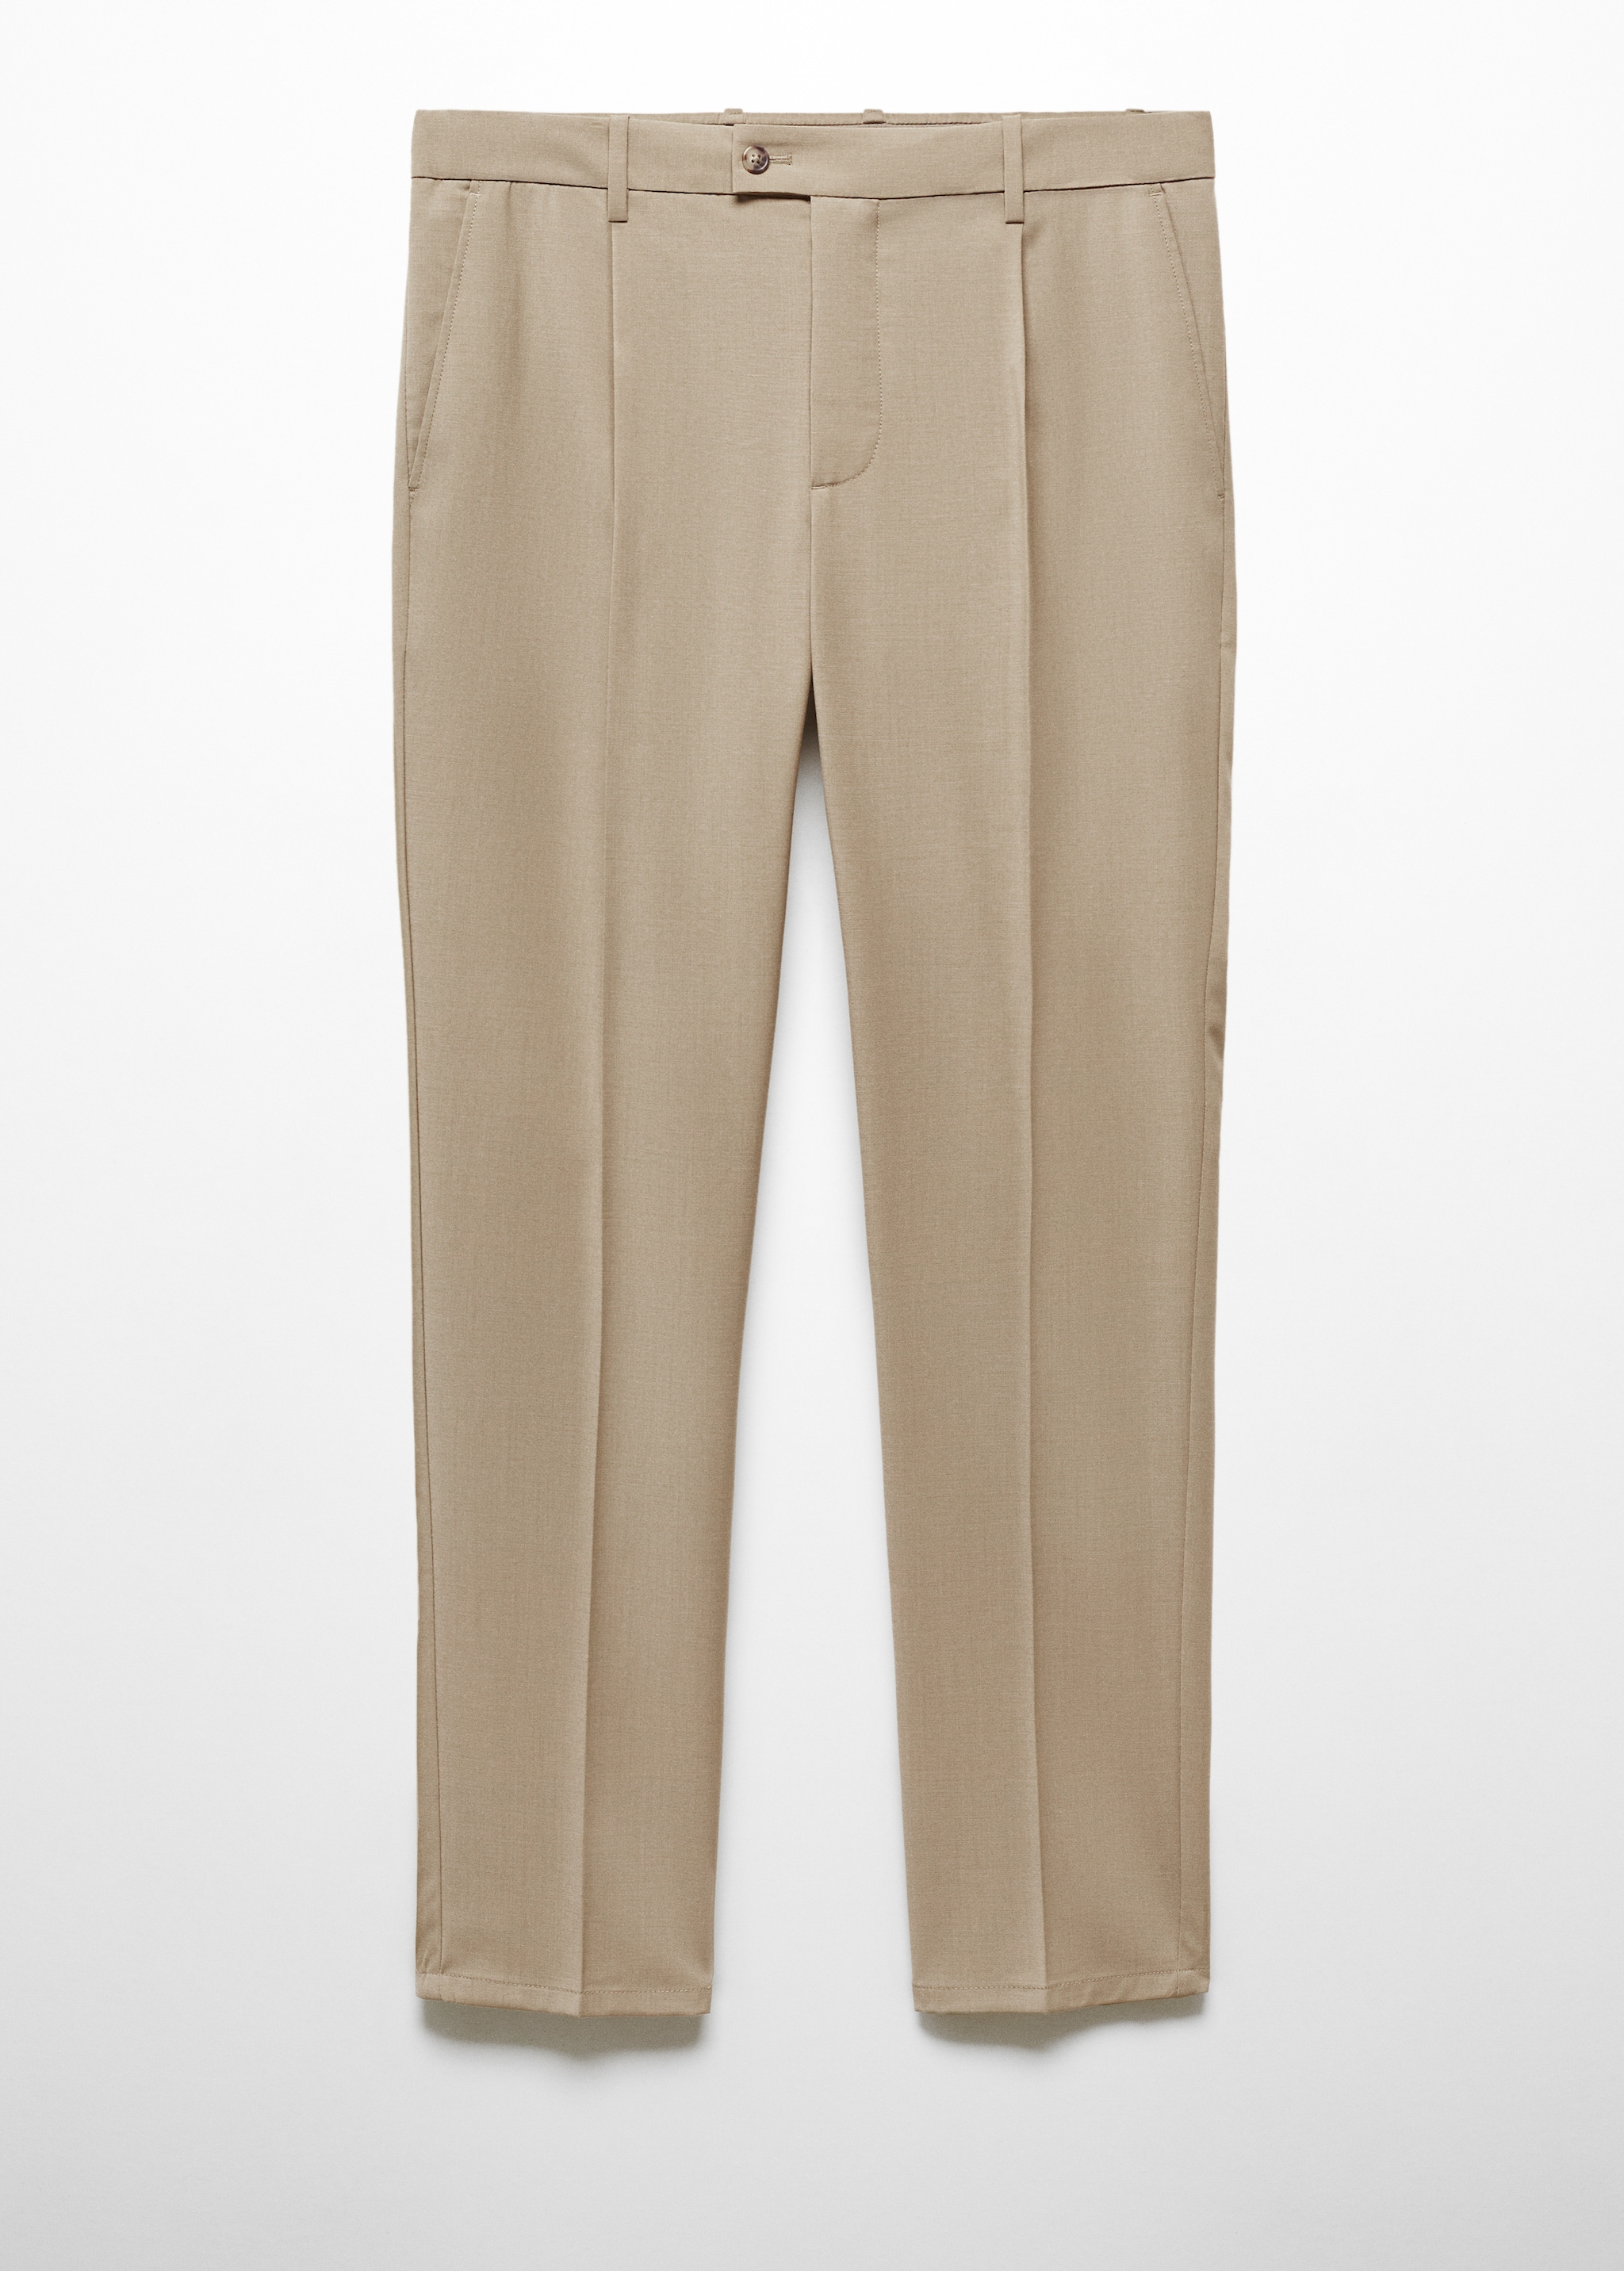 Cold wool trousers with pleat detail - Article without model